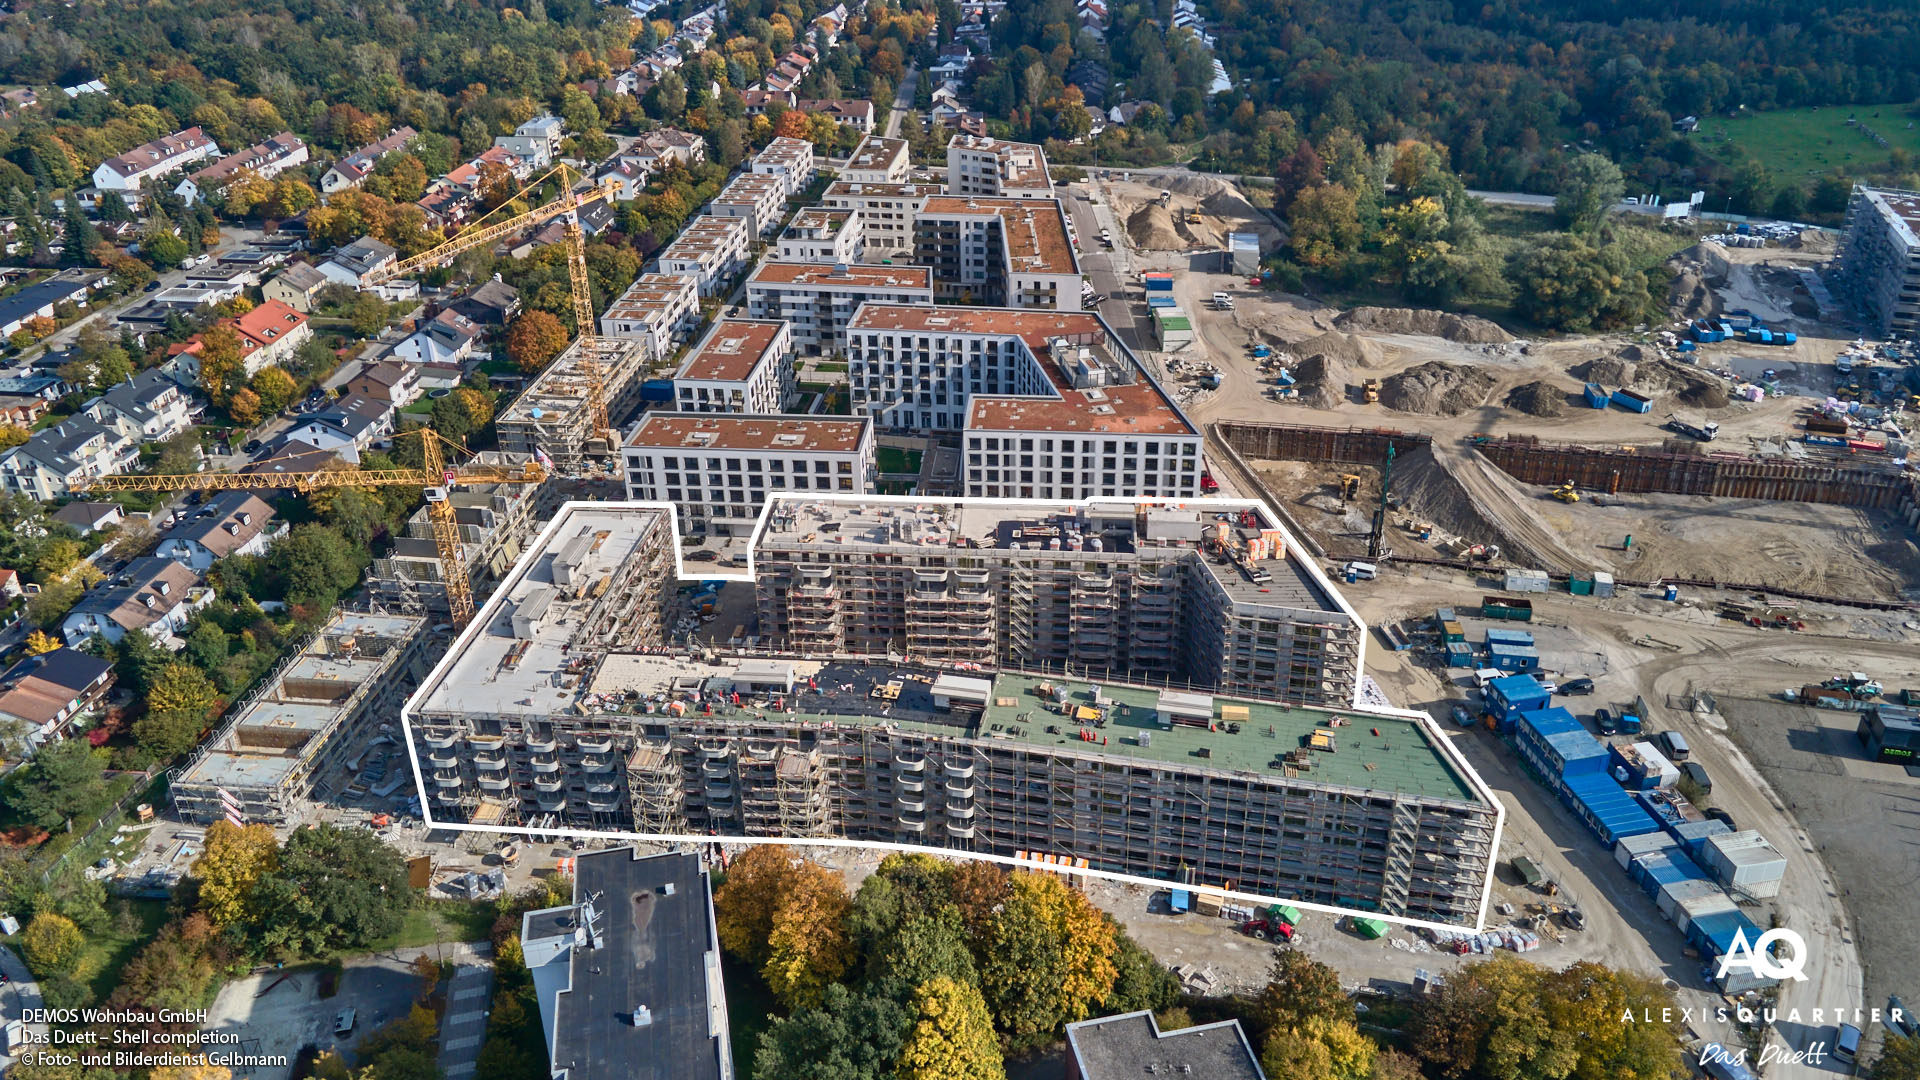 'ALEXISQUARTIER - The Duet' in Munich-Perlach: Completion of the building shell